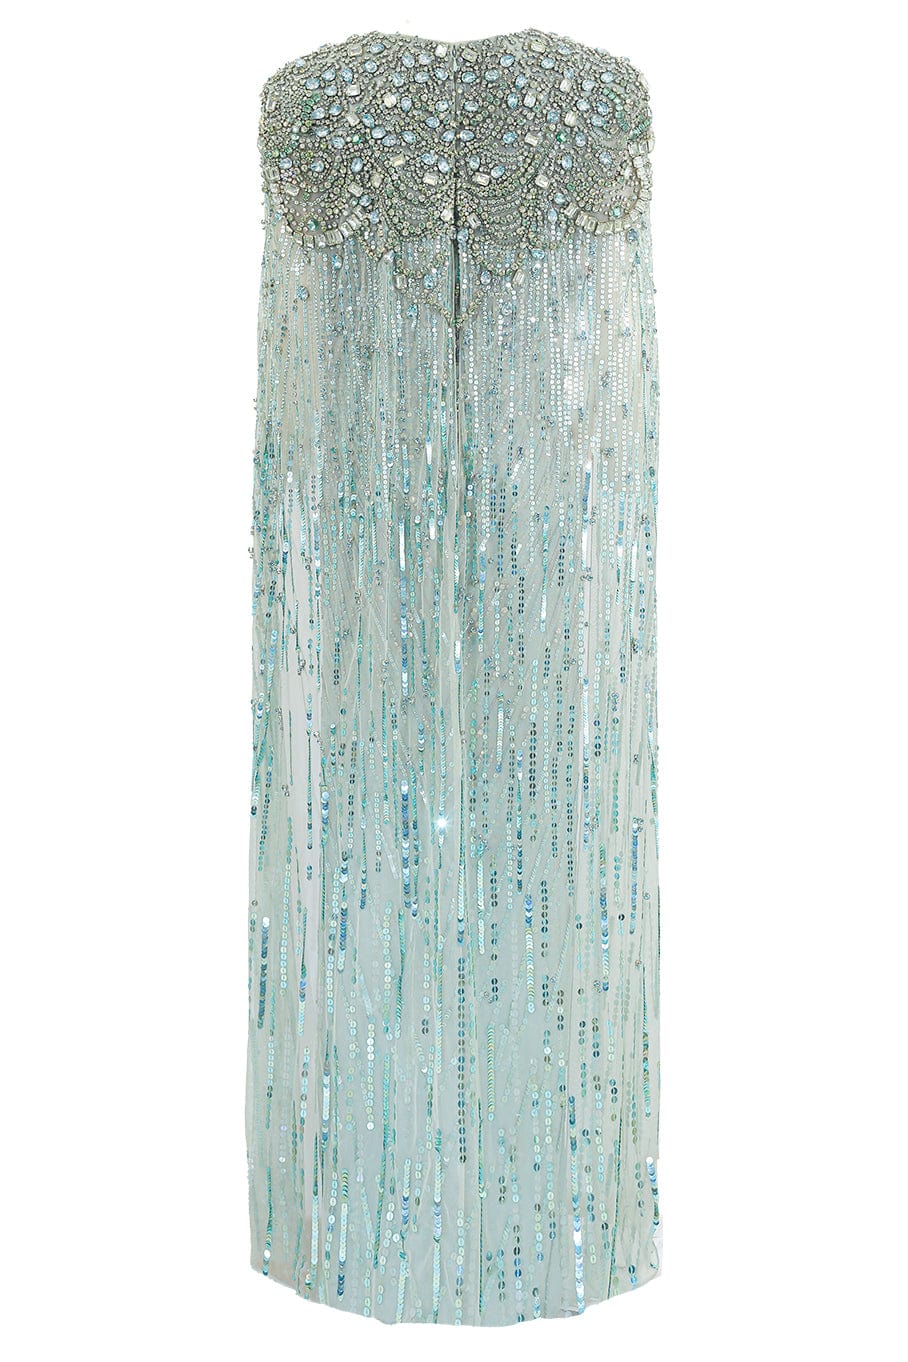 JENNY PACKHAM-Lotus Lady Gown-GENTLE GREEN